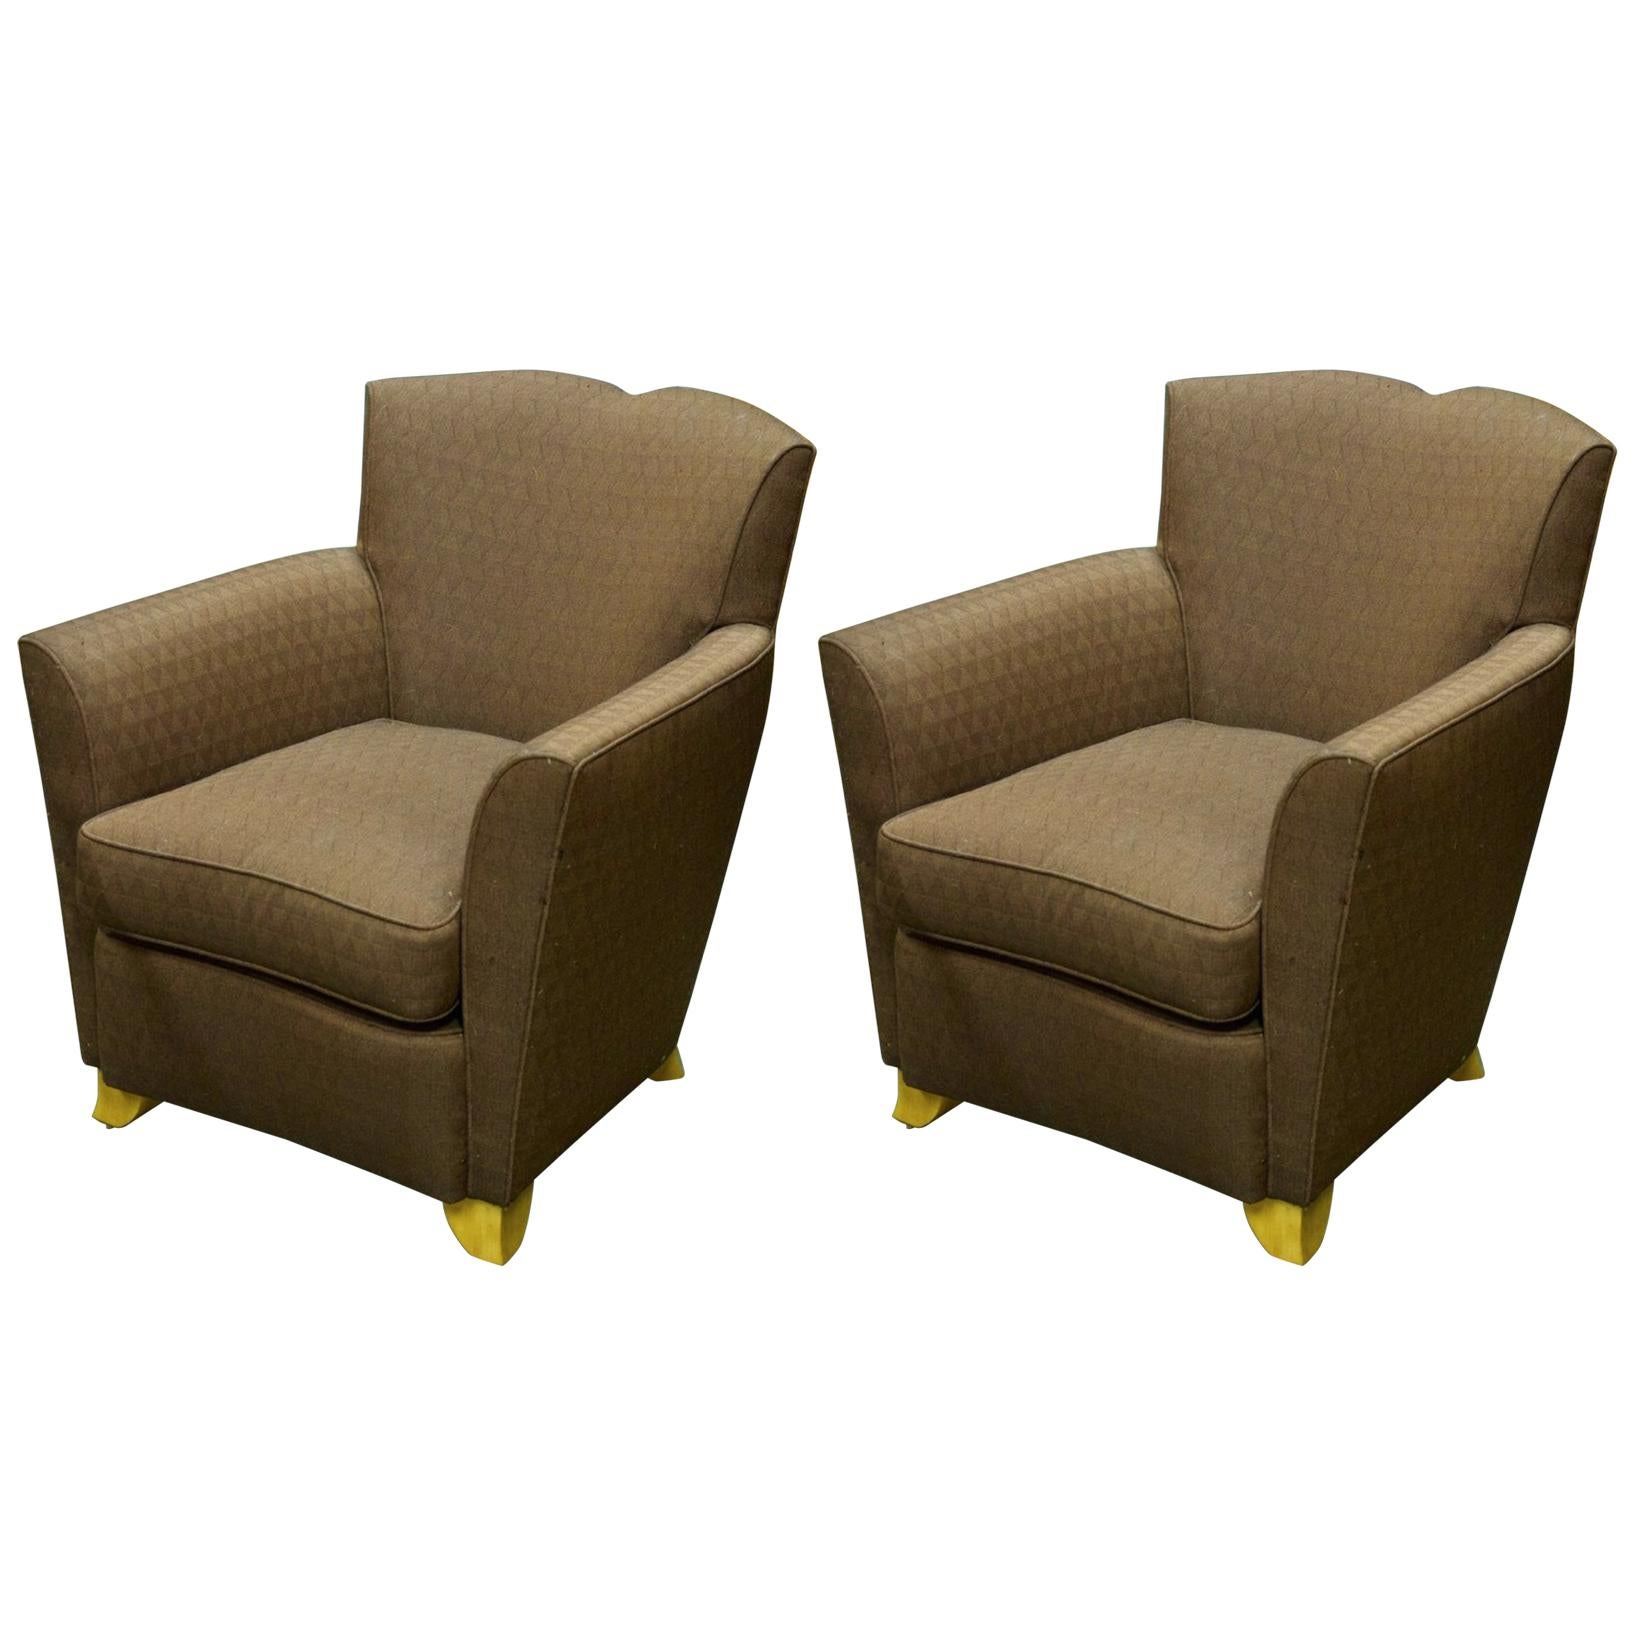 Dominique Pair of "Mustache" Club Chairs